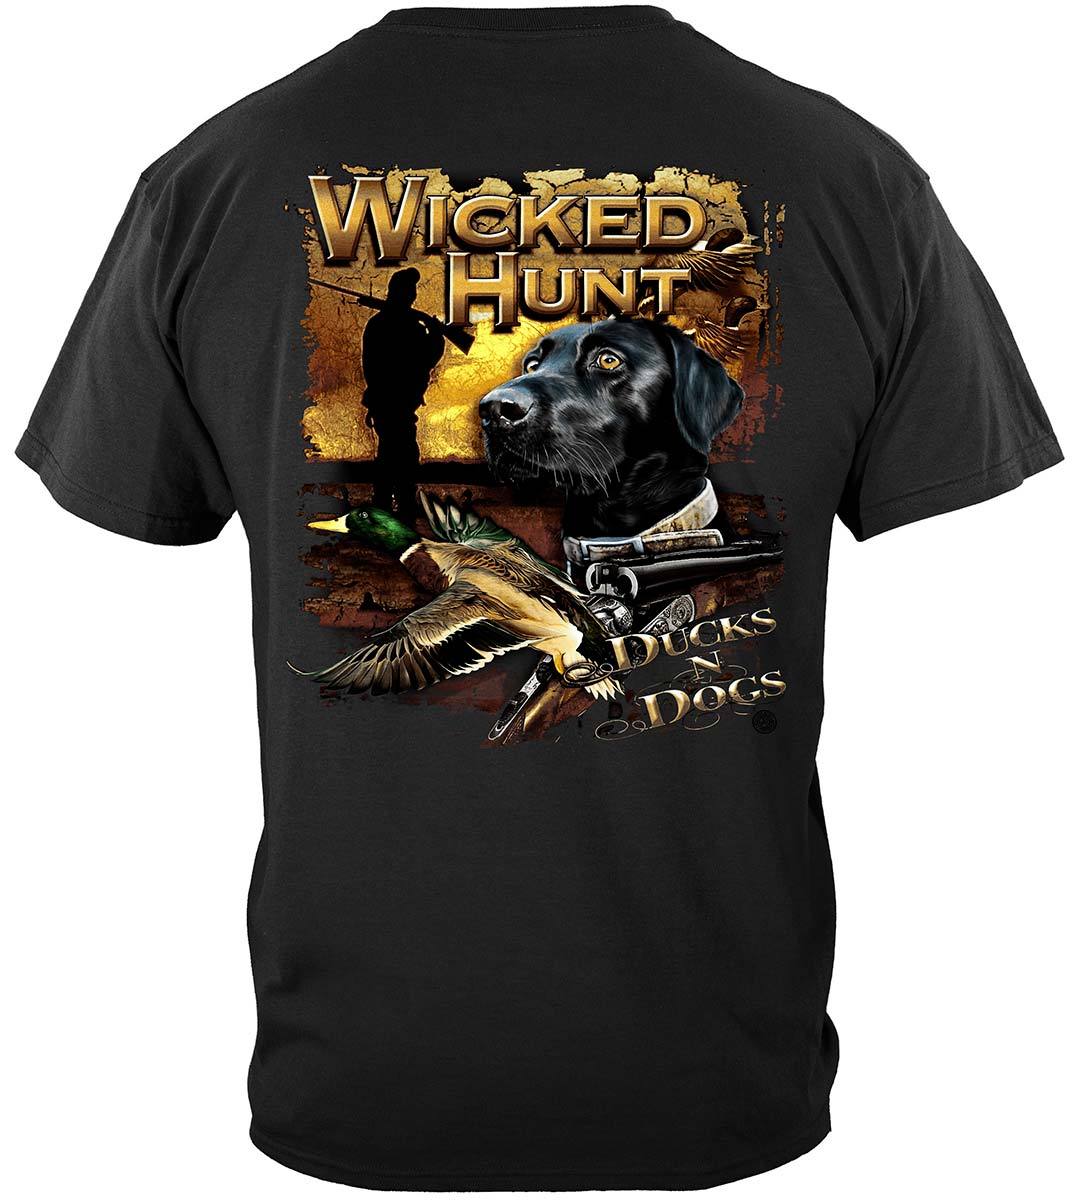 Wicked Hunt Ducks And Dogs Premium T-Shirt